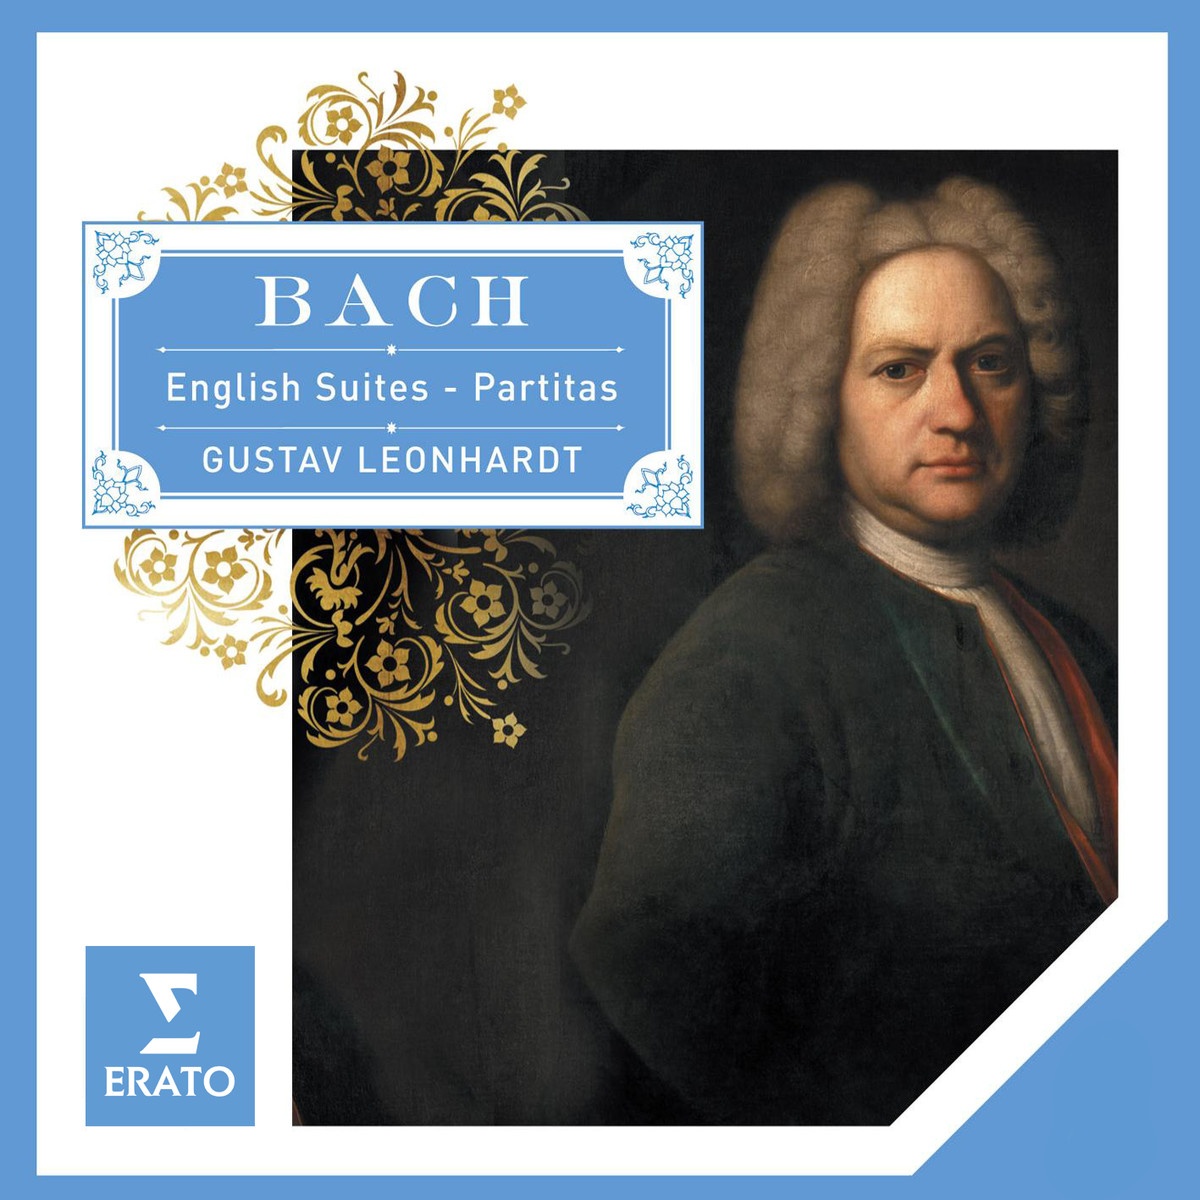 6 English Suites BWV806-811, No. 1 in A major BWV806: Gigue